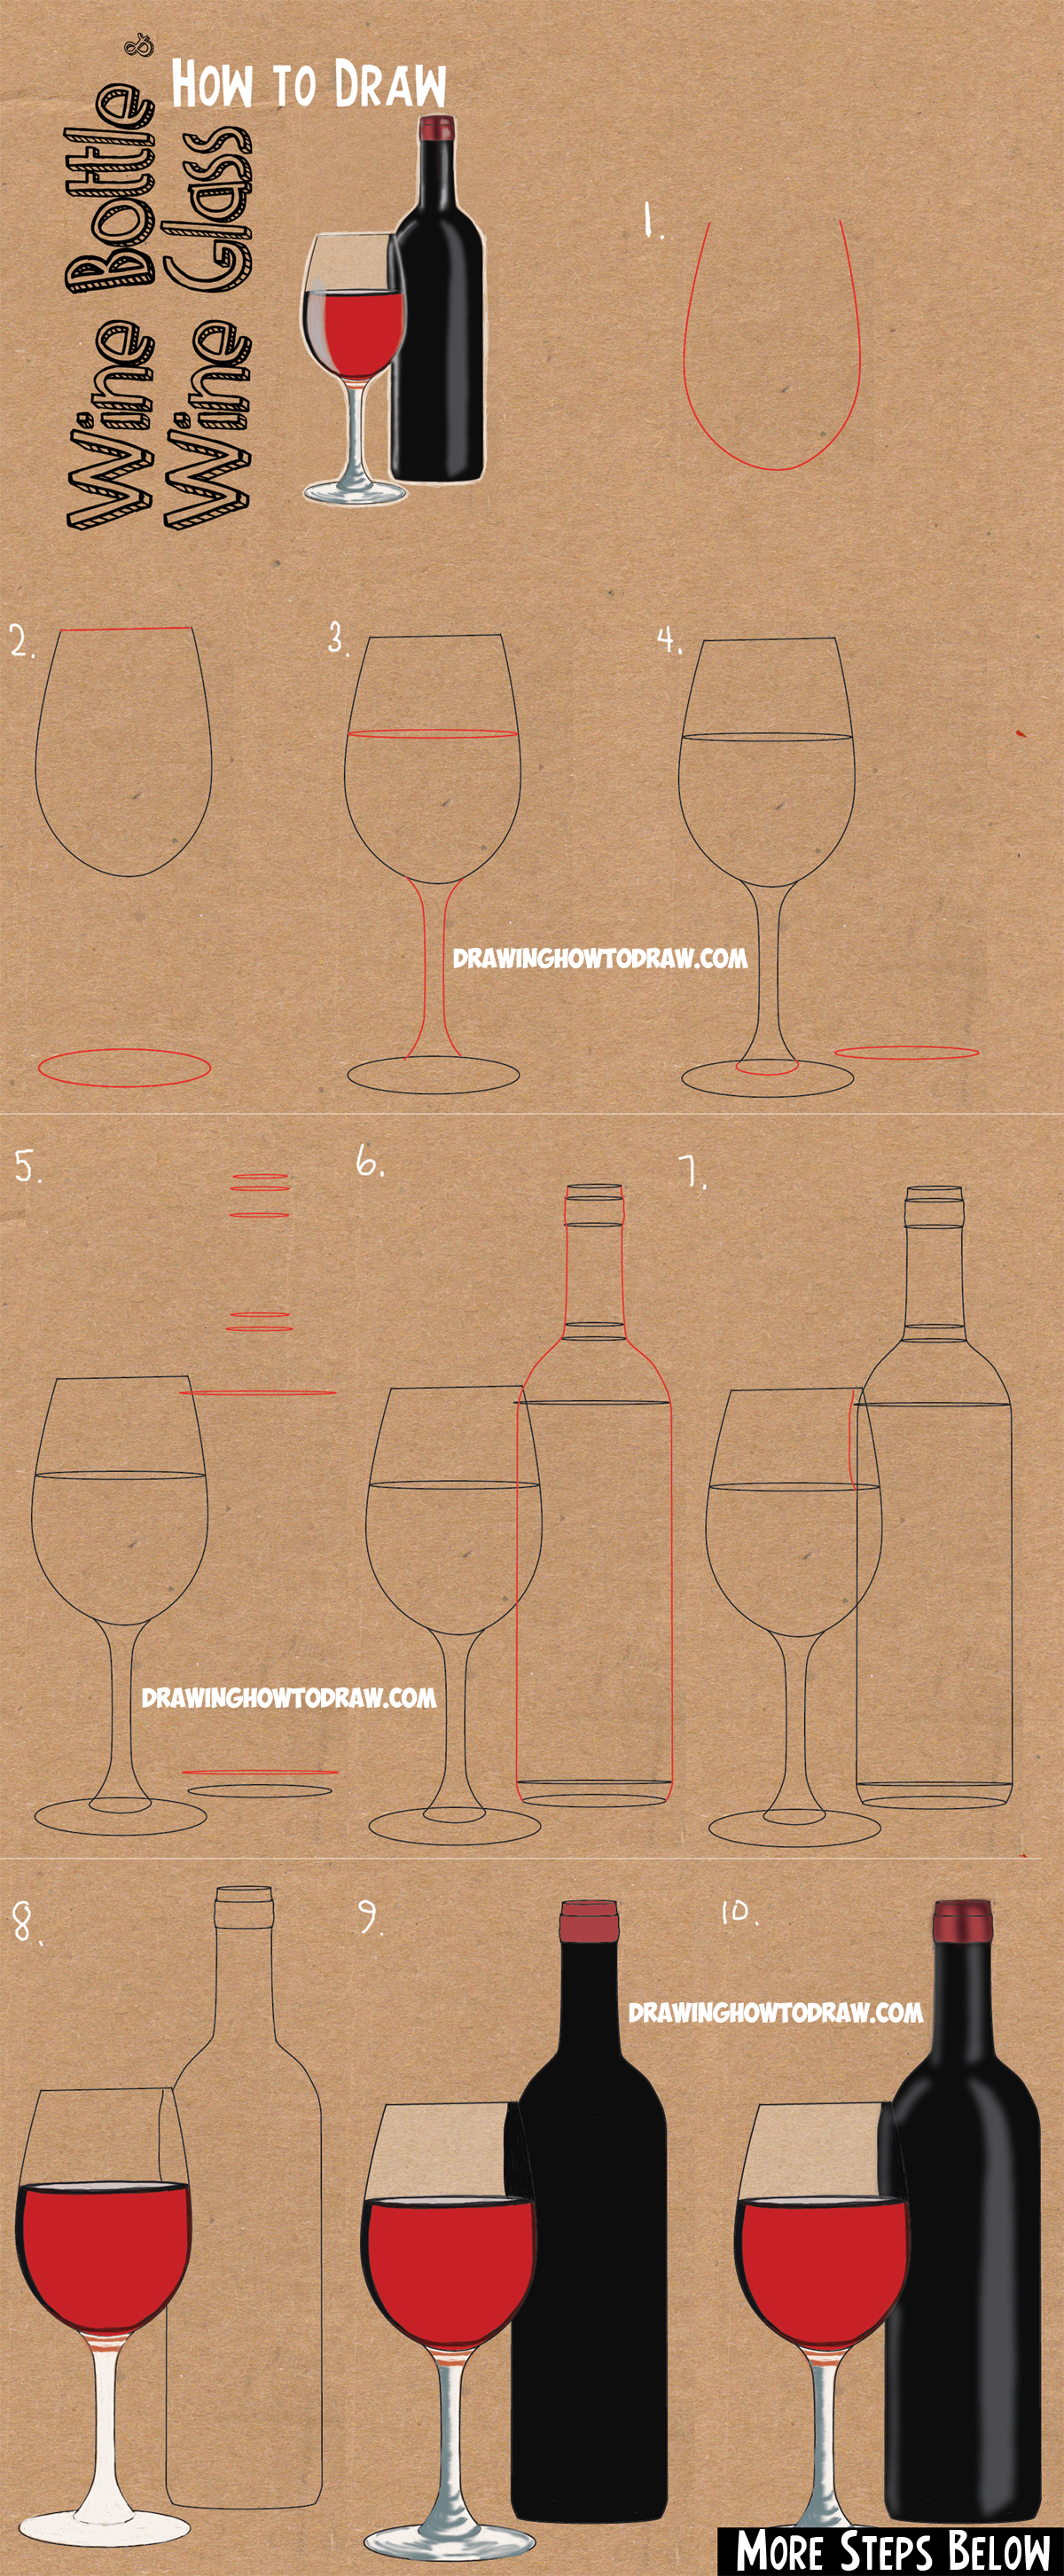 How to Draw a Bottle of Wine and Glass of Wine : Easy Step by Step Drawing Lesson